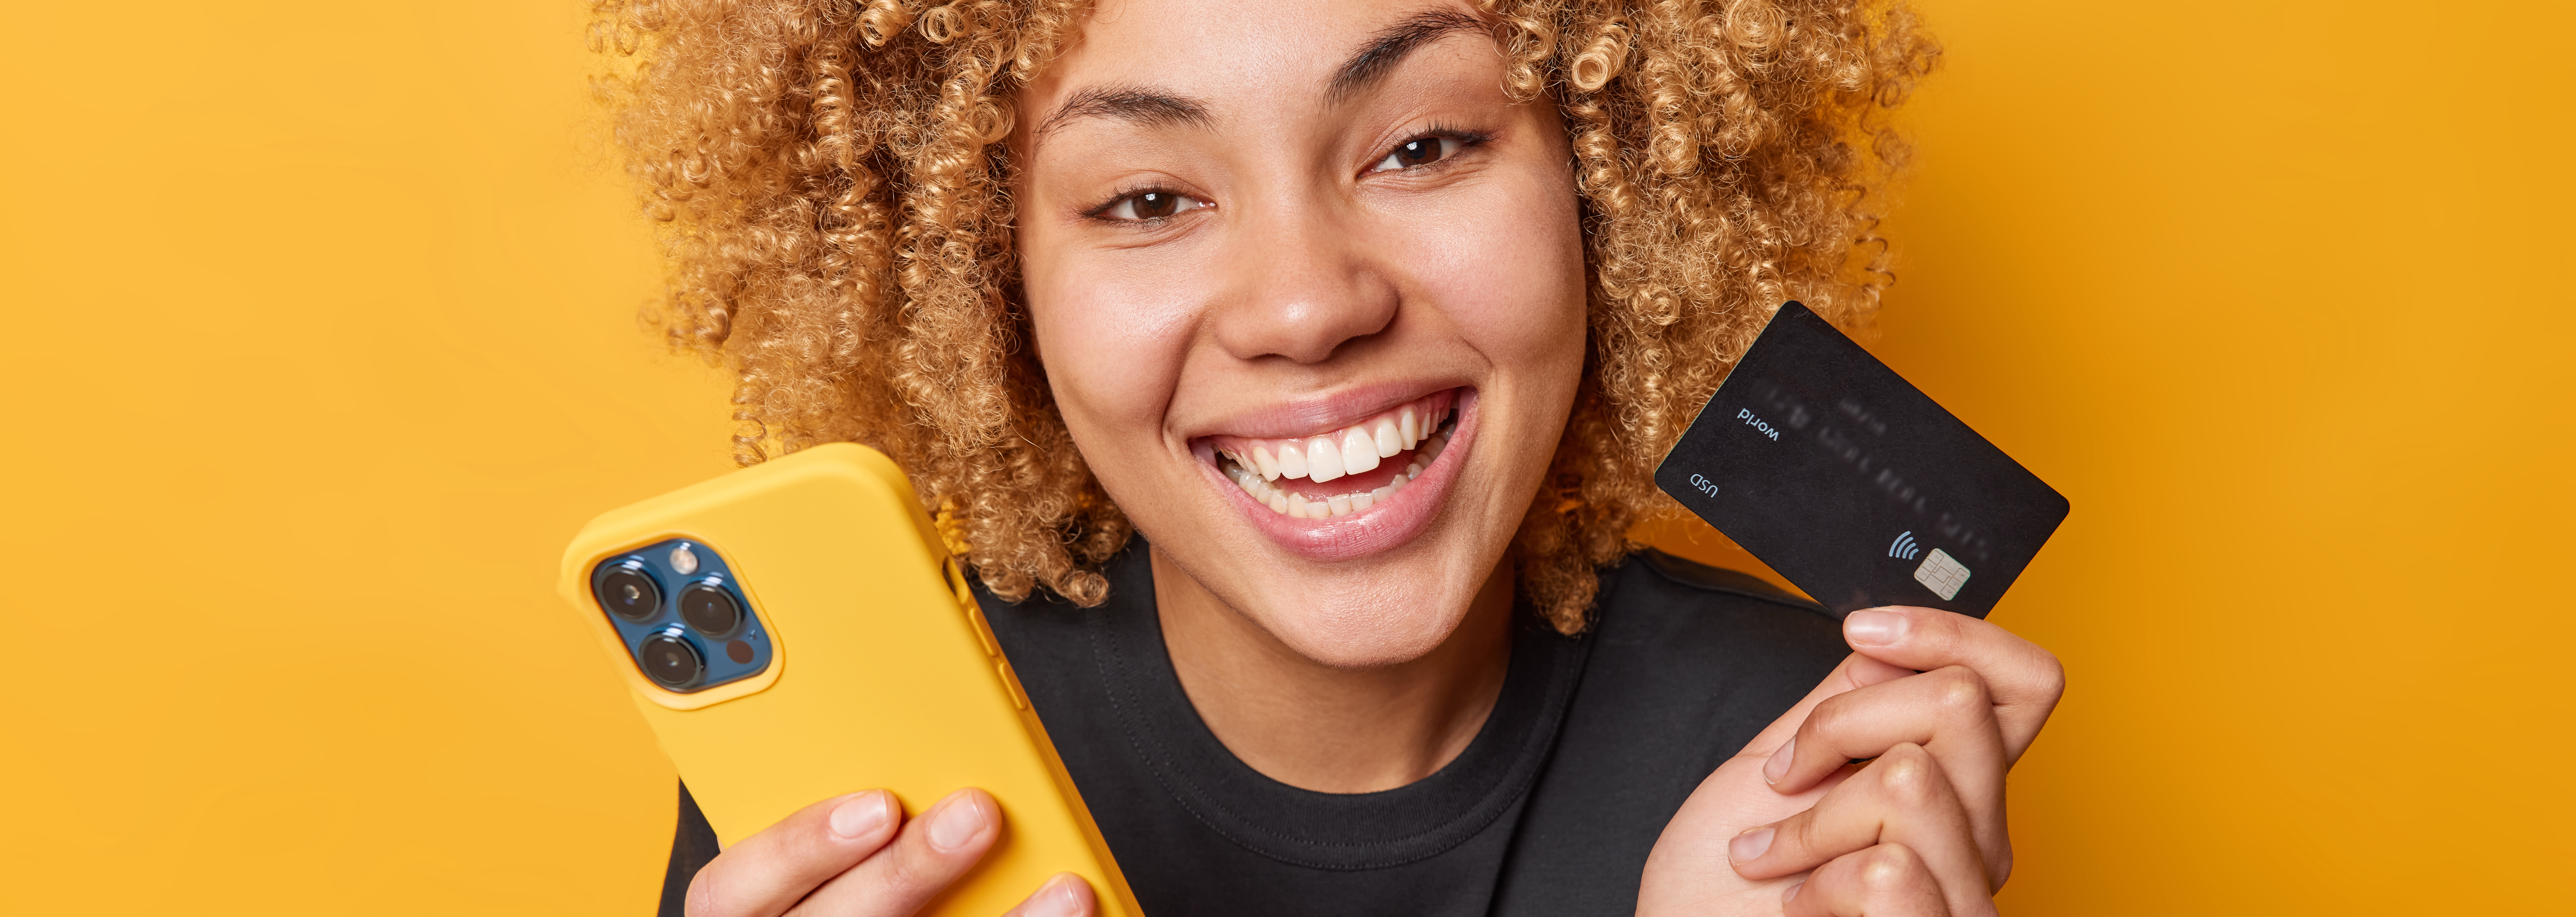 happy-curly-female-shopper-enjoys-easy-paying-goods-online-smiles-broadly-shows-white-teeth-uses-mobile-phone-credit-card-dressed-casual-black-t-shirt-isolated-yellow-background